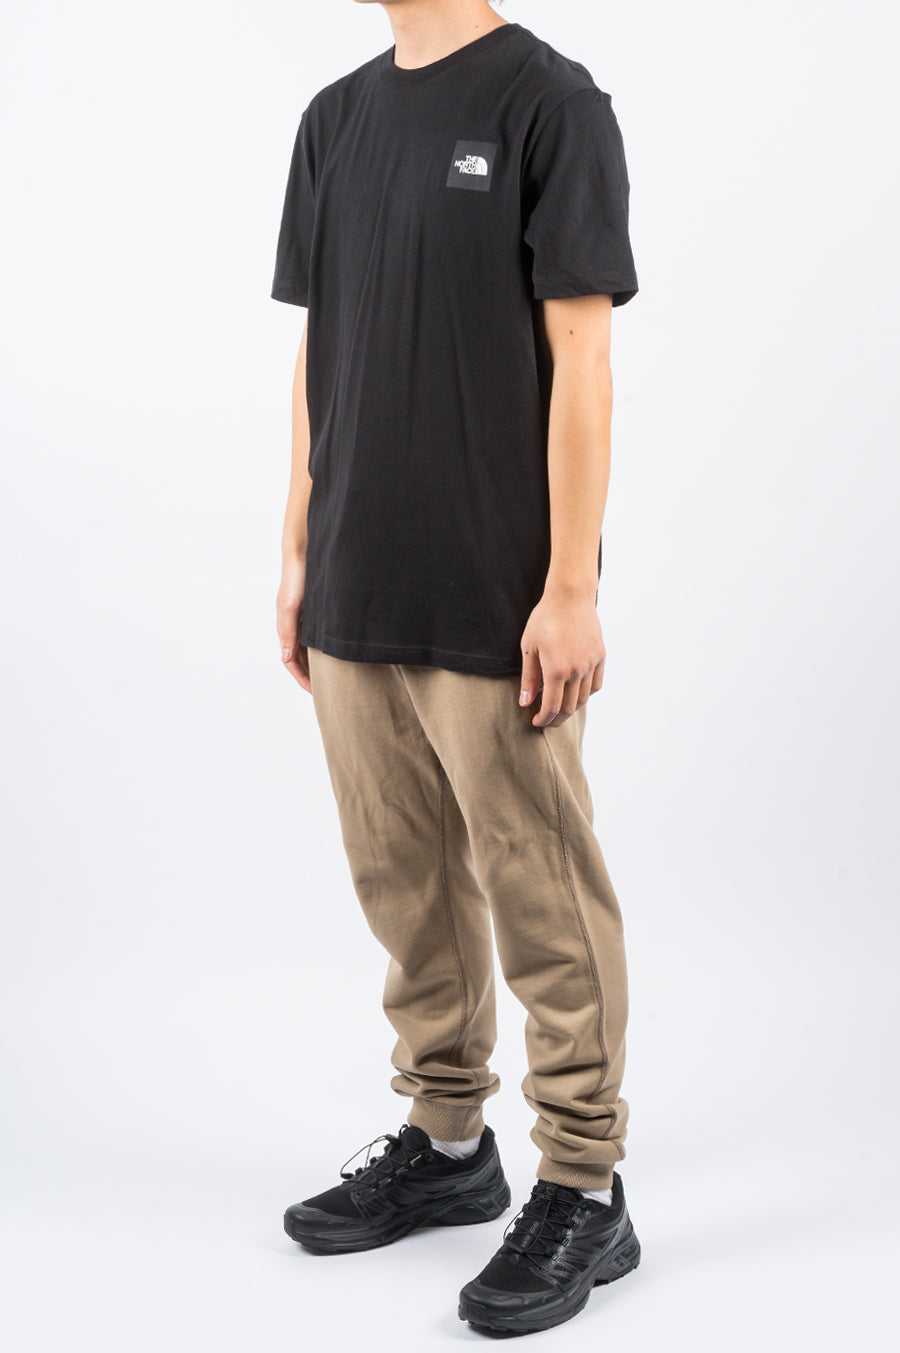 THE NORTH FACE SS BOX TEE BLACK - BLENDS